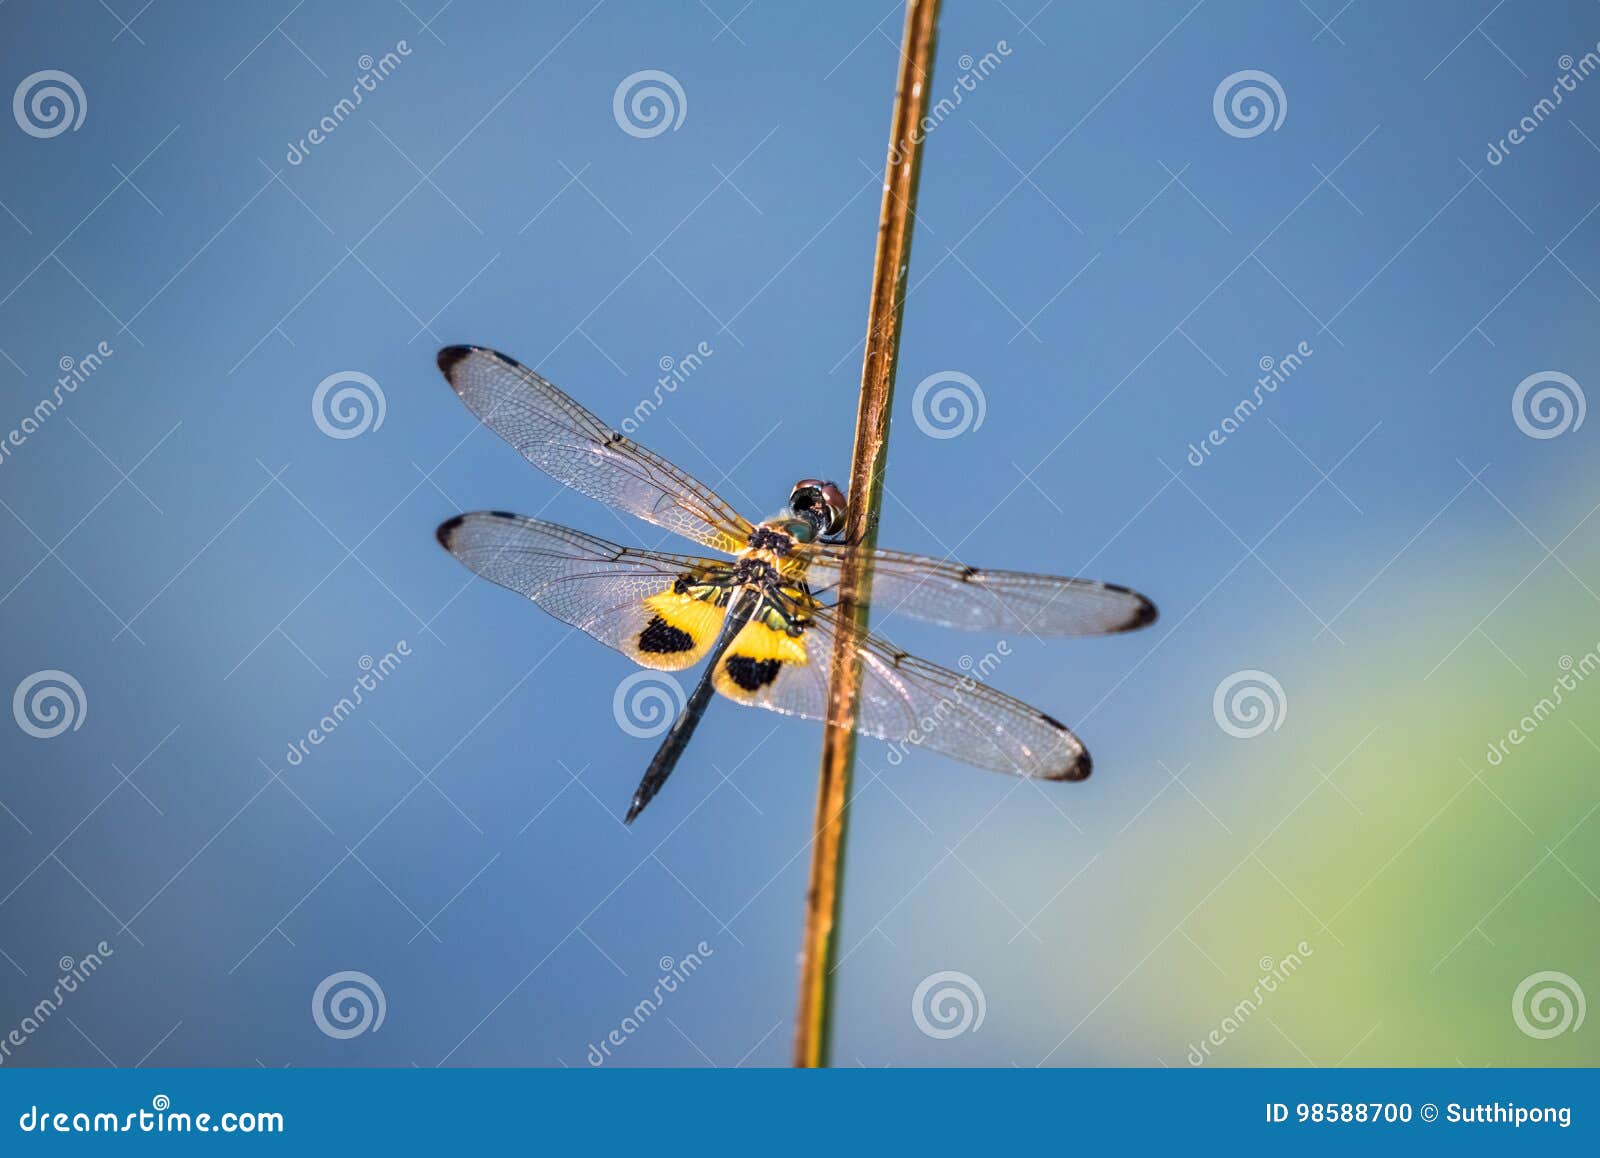 dragonfly resting on a branch.